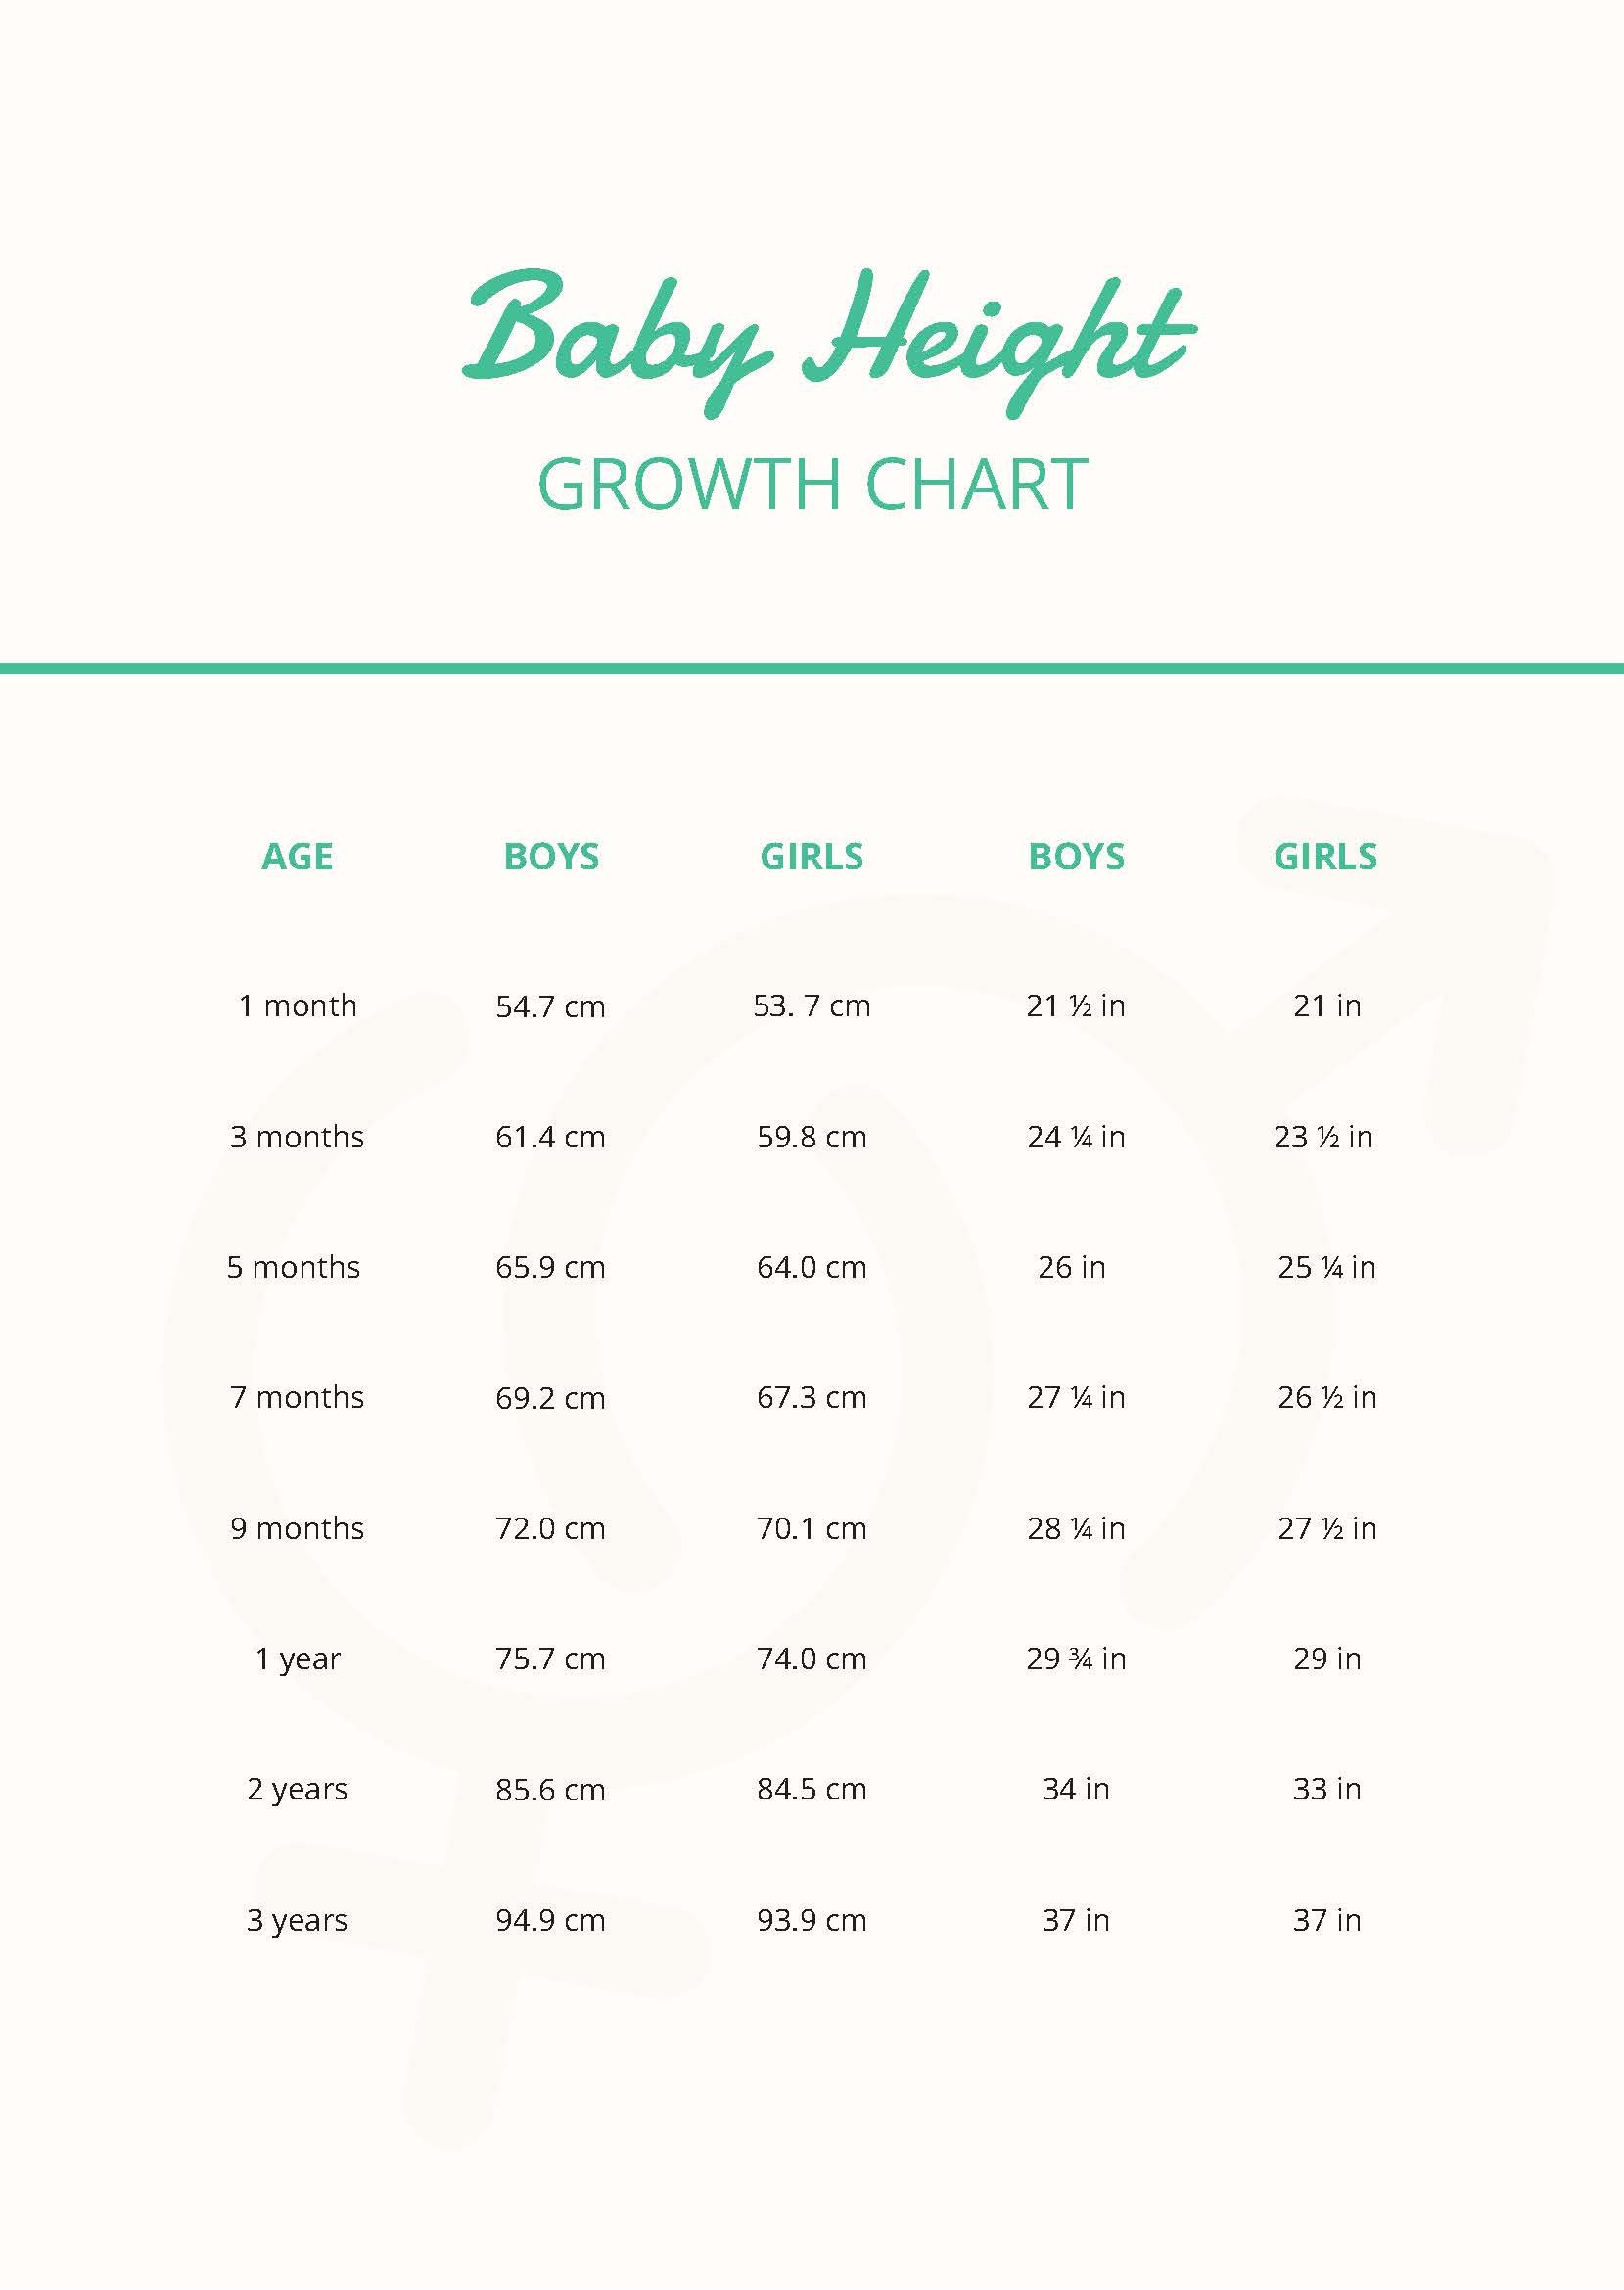 Baby Height Growth Chart in PDF